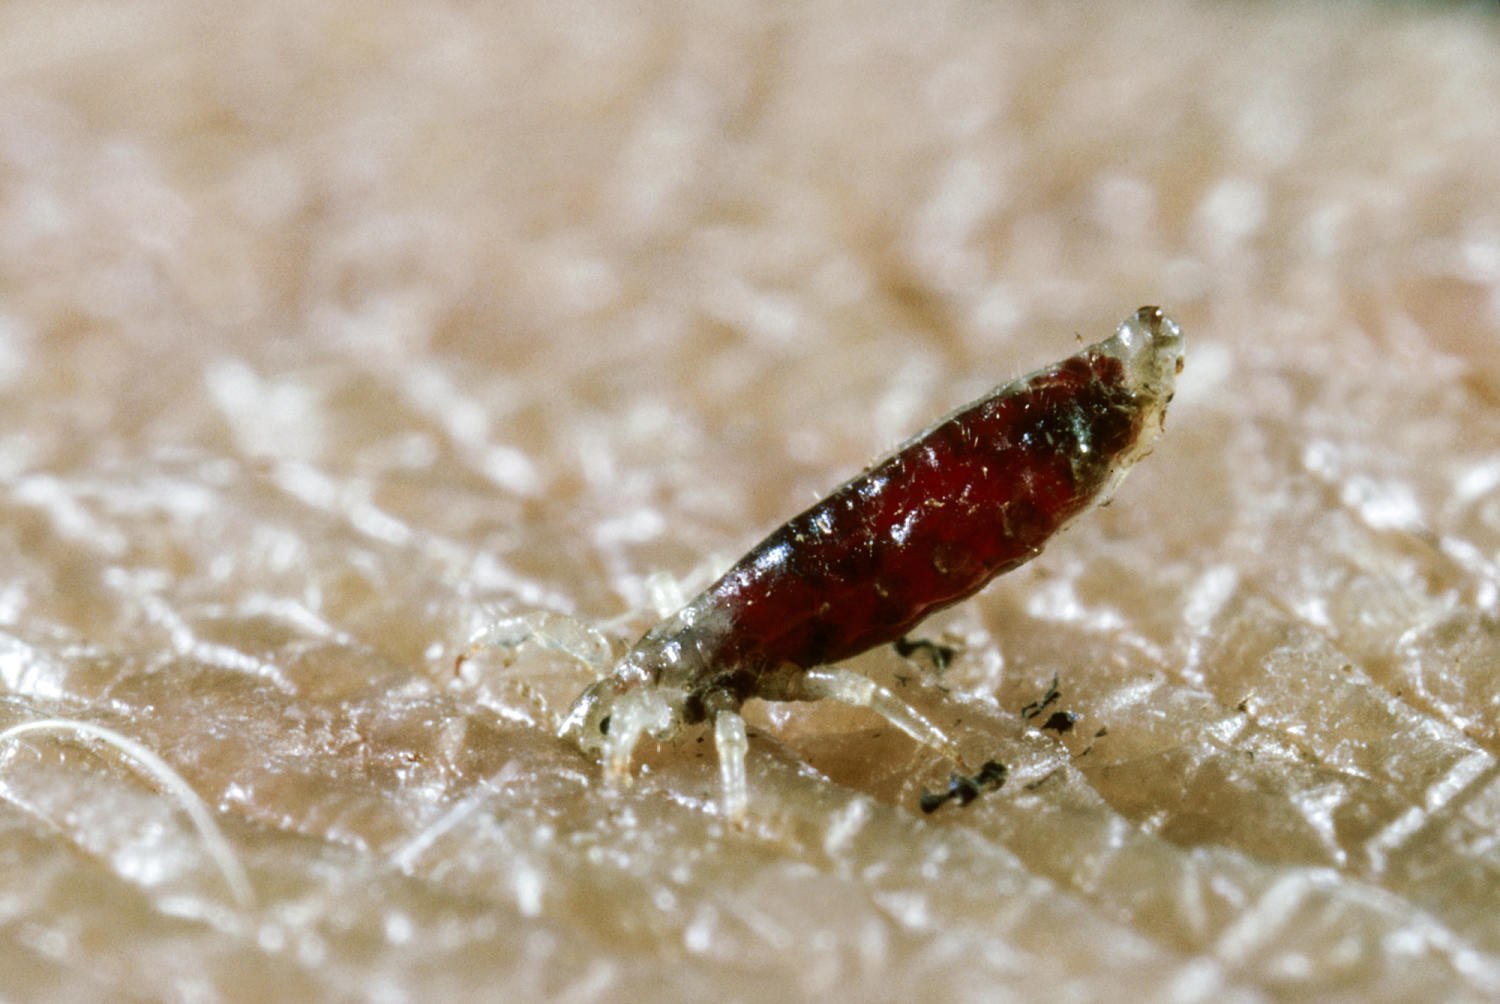 Blood-sucking body lice may have spread plague more than thought, science suggests